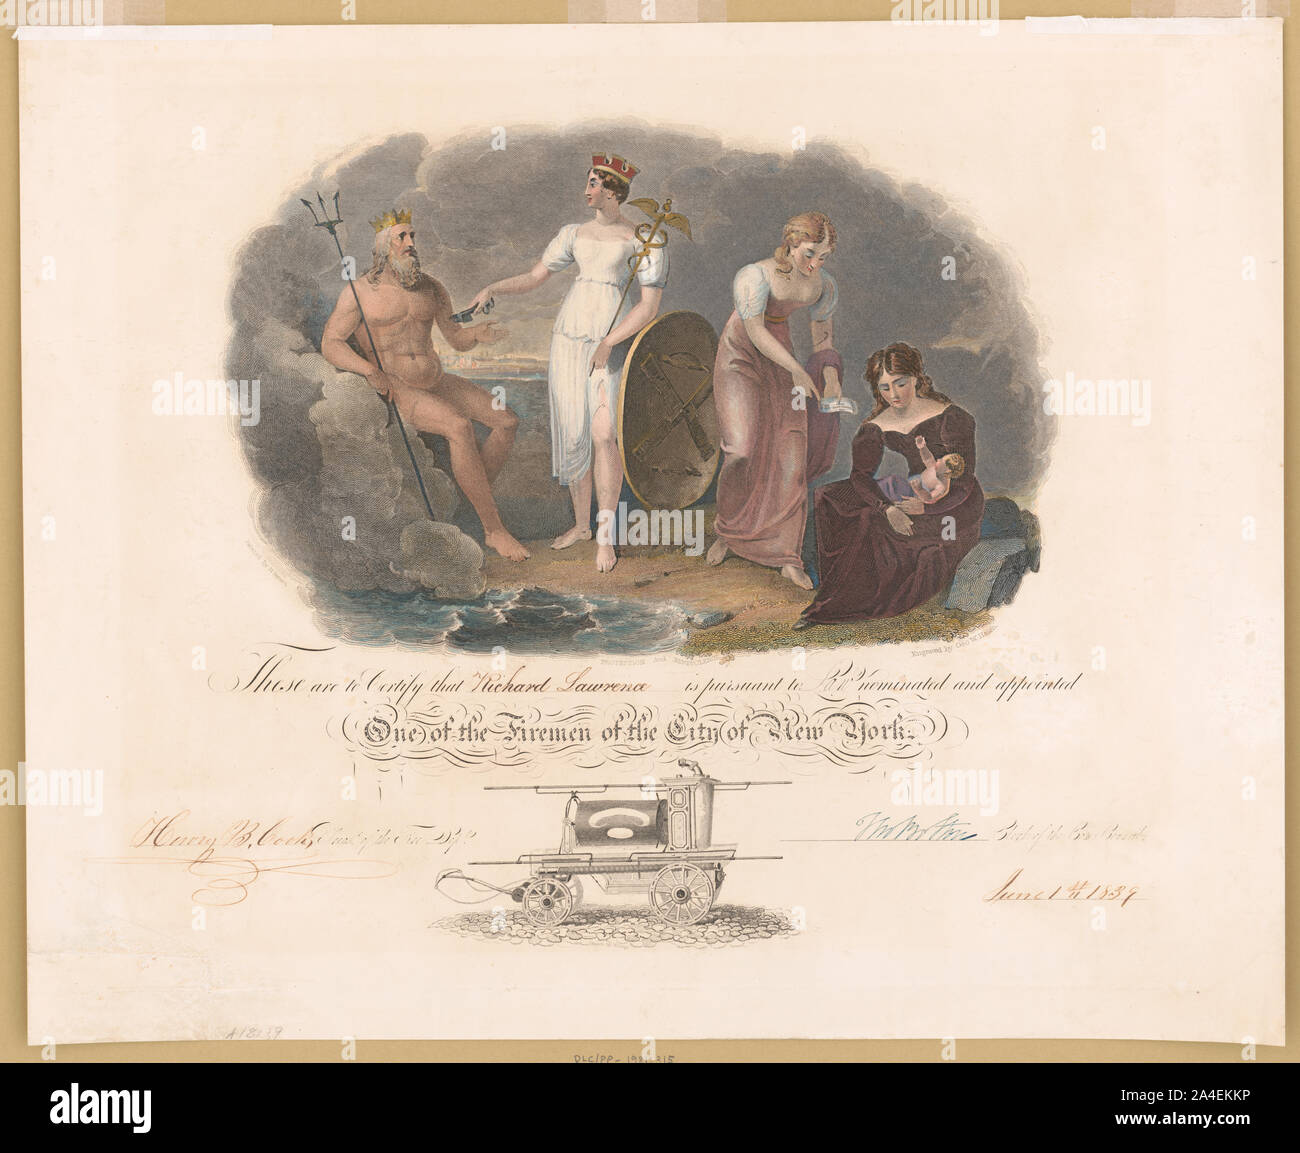 These are to certify that Richard Lawrence is pursuant to law nominated and appointed one of the fireman of the City of New York / painted by H. Inman Stock Photo